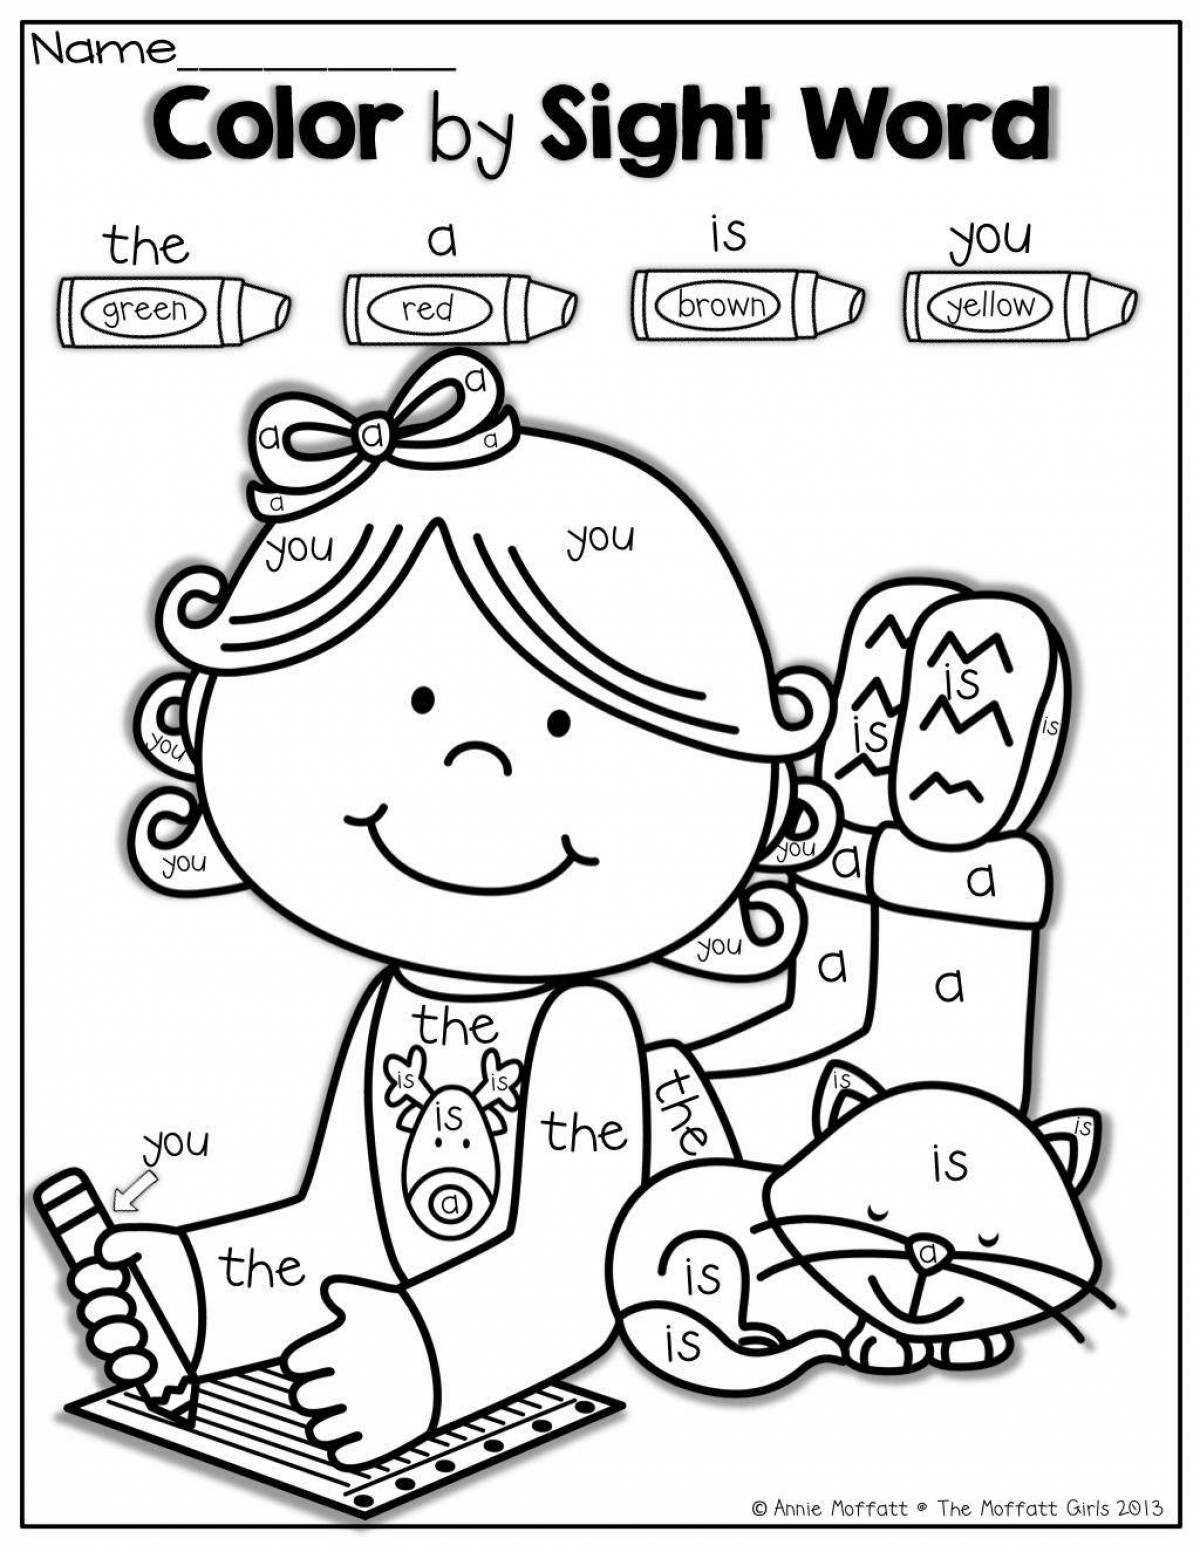 A fun coloring book in English for kids